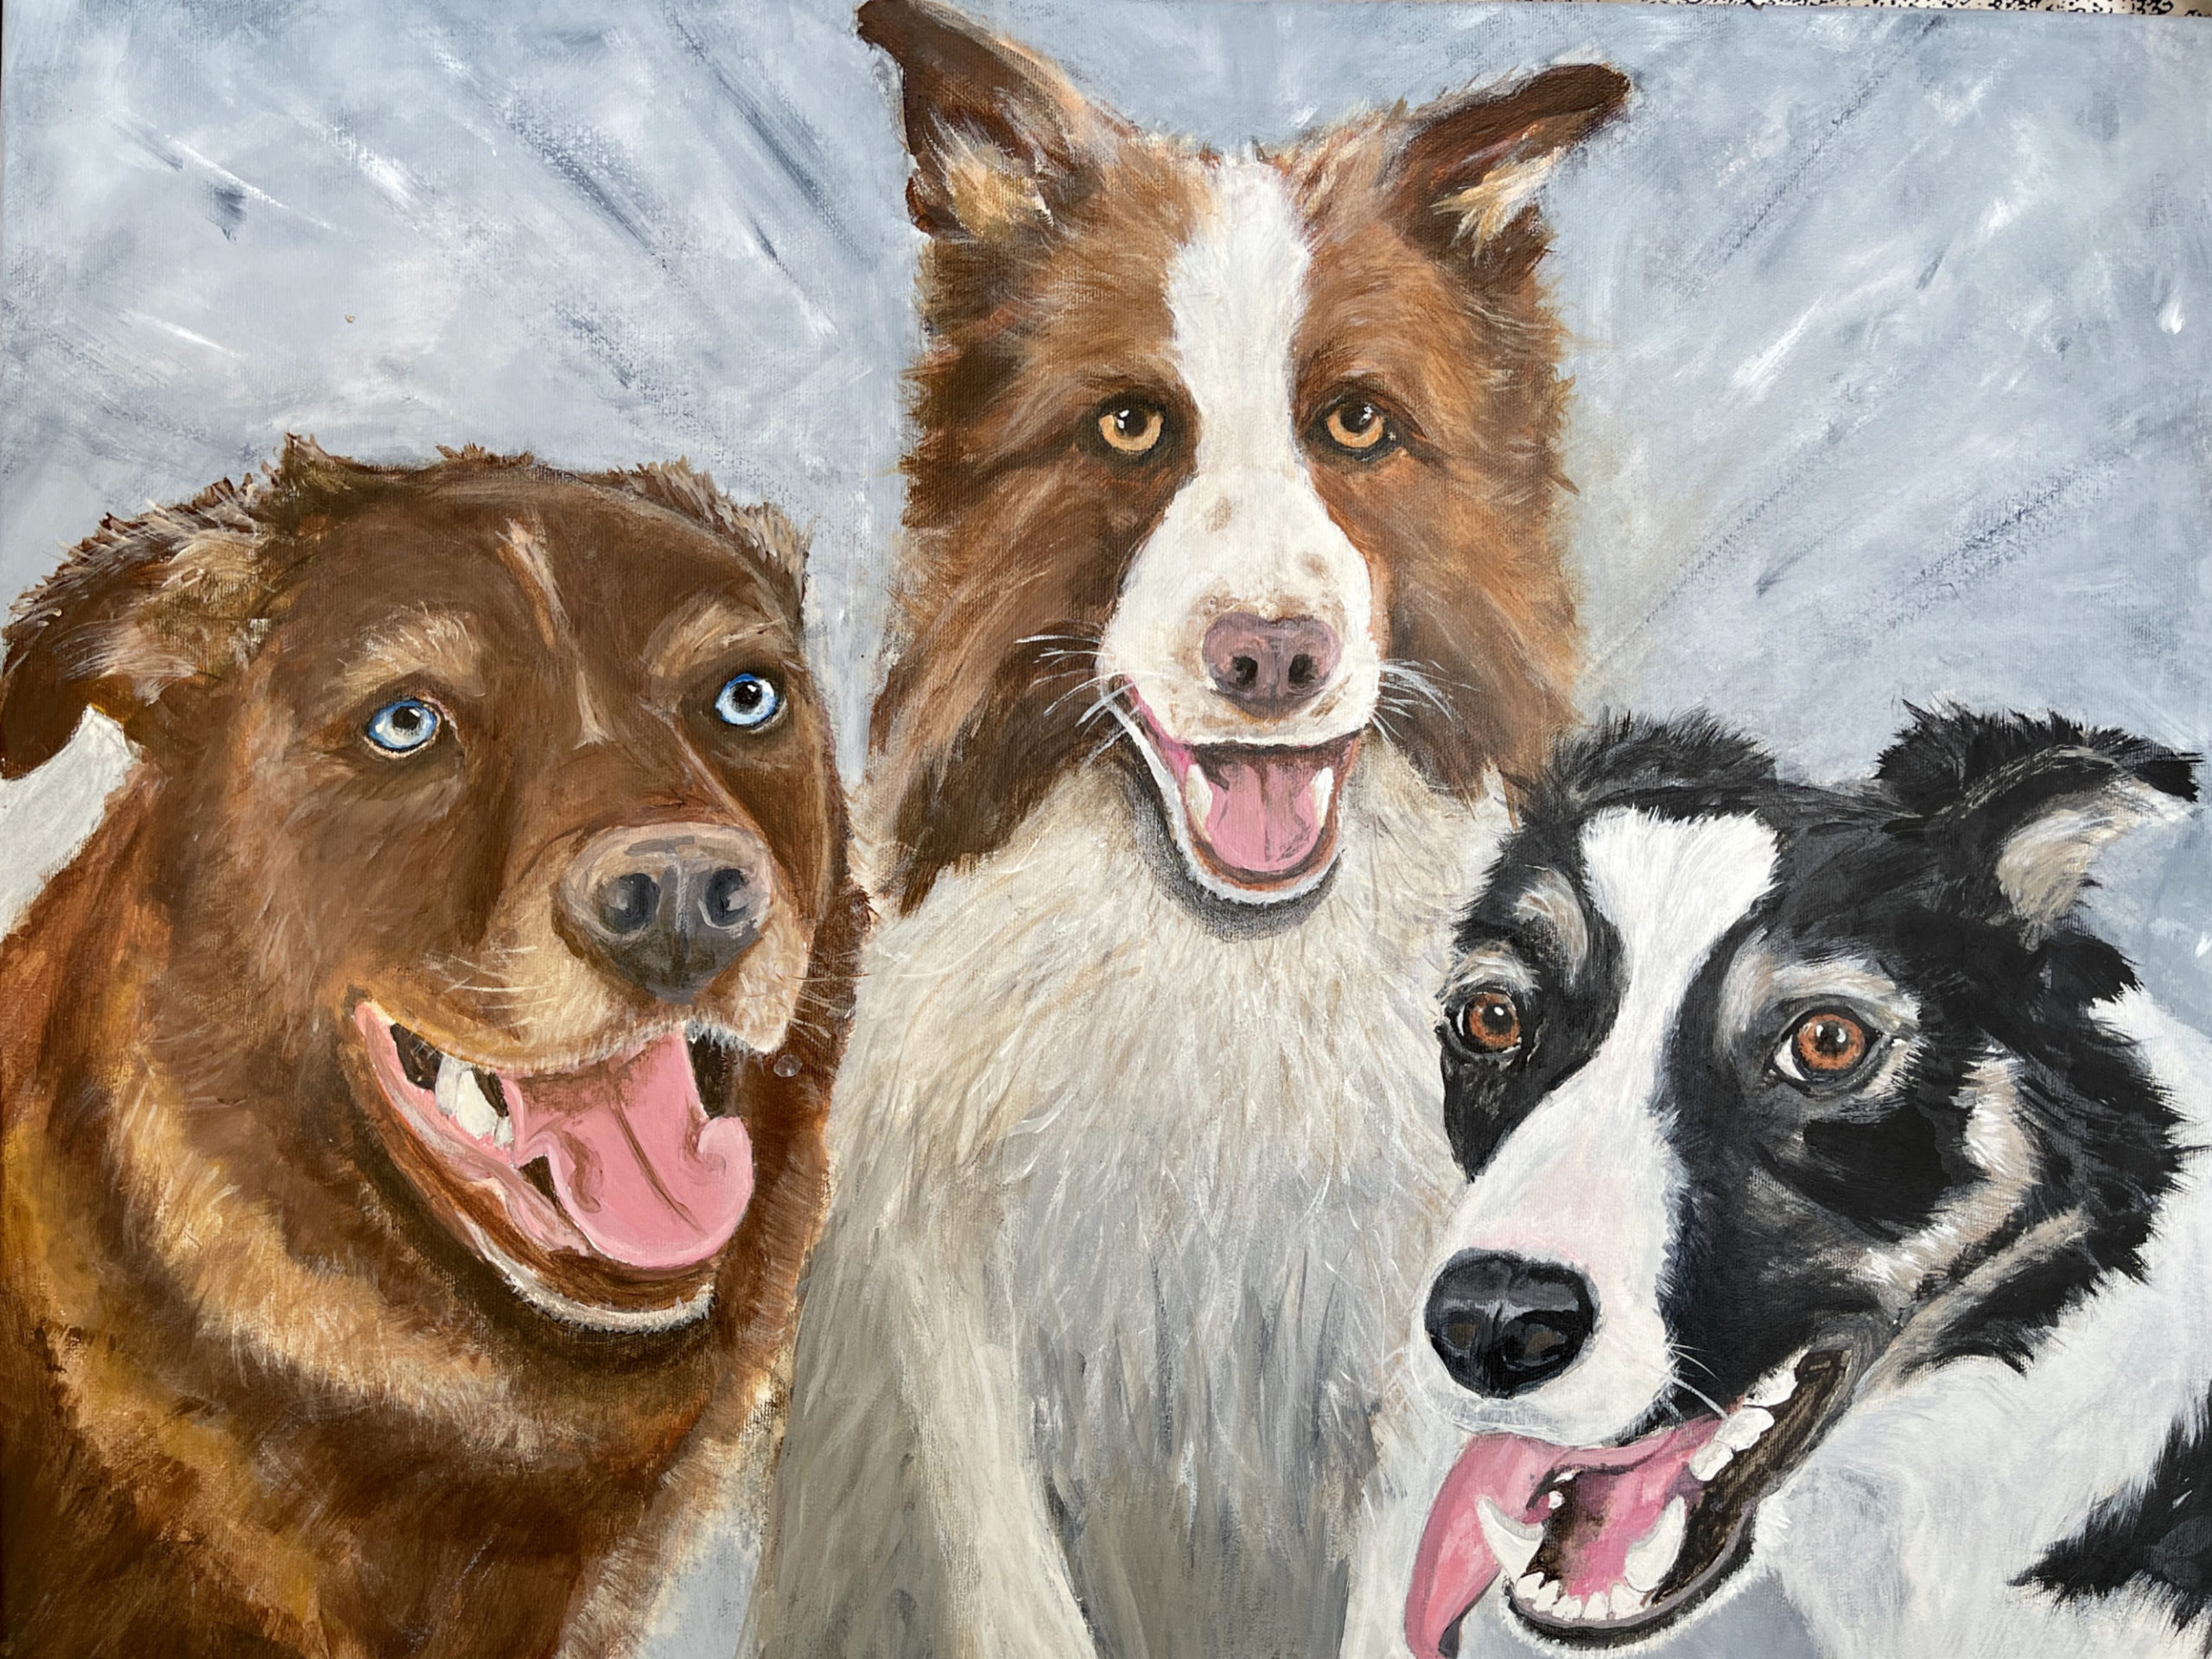 The 3 Amigo's - Sorry, This one's SOLD